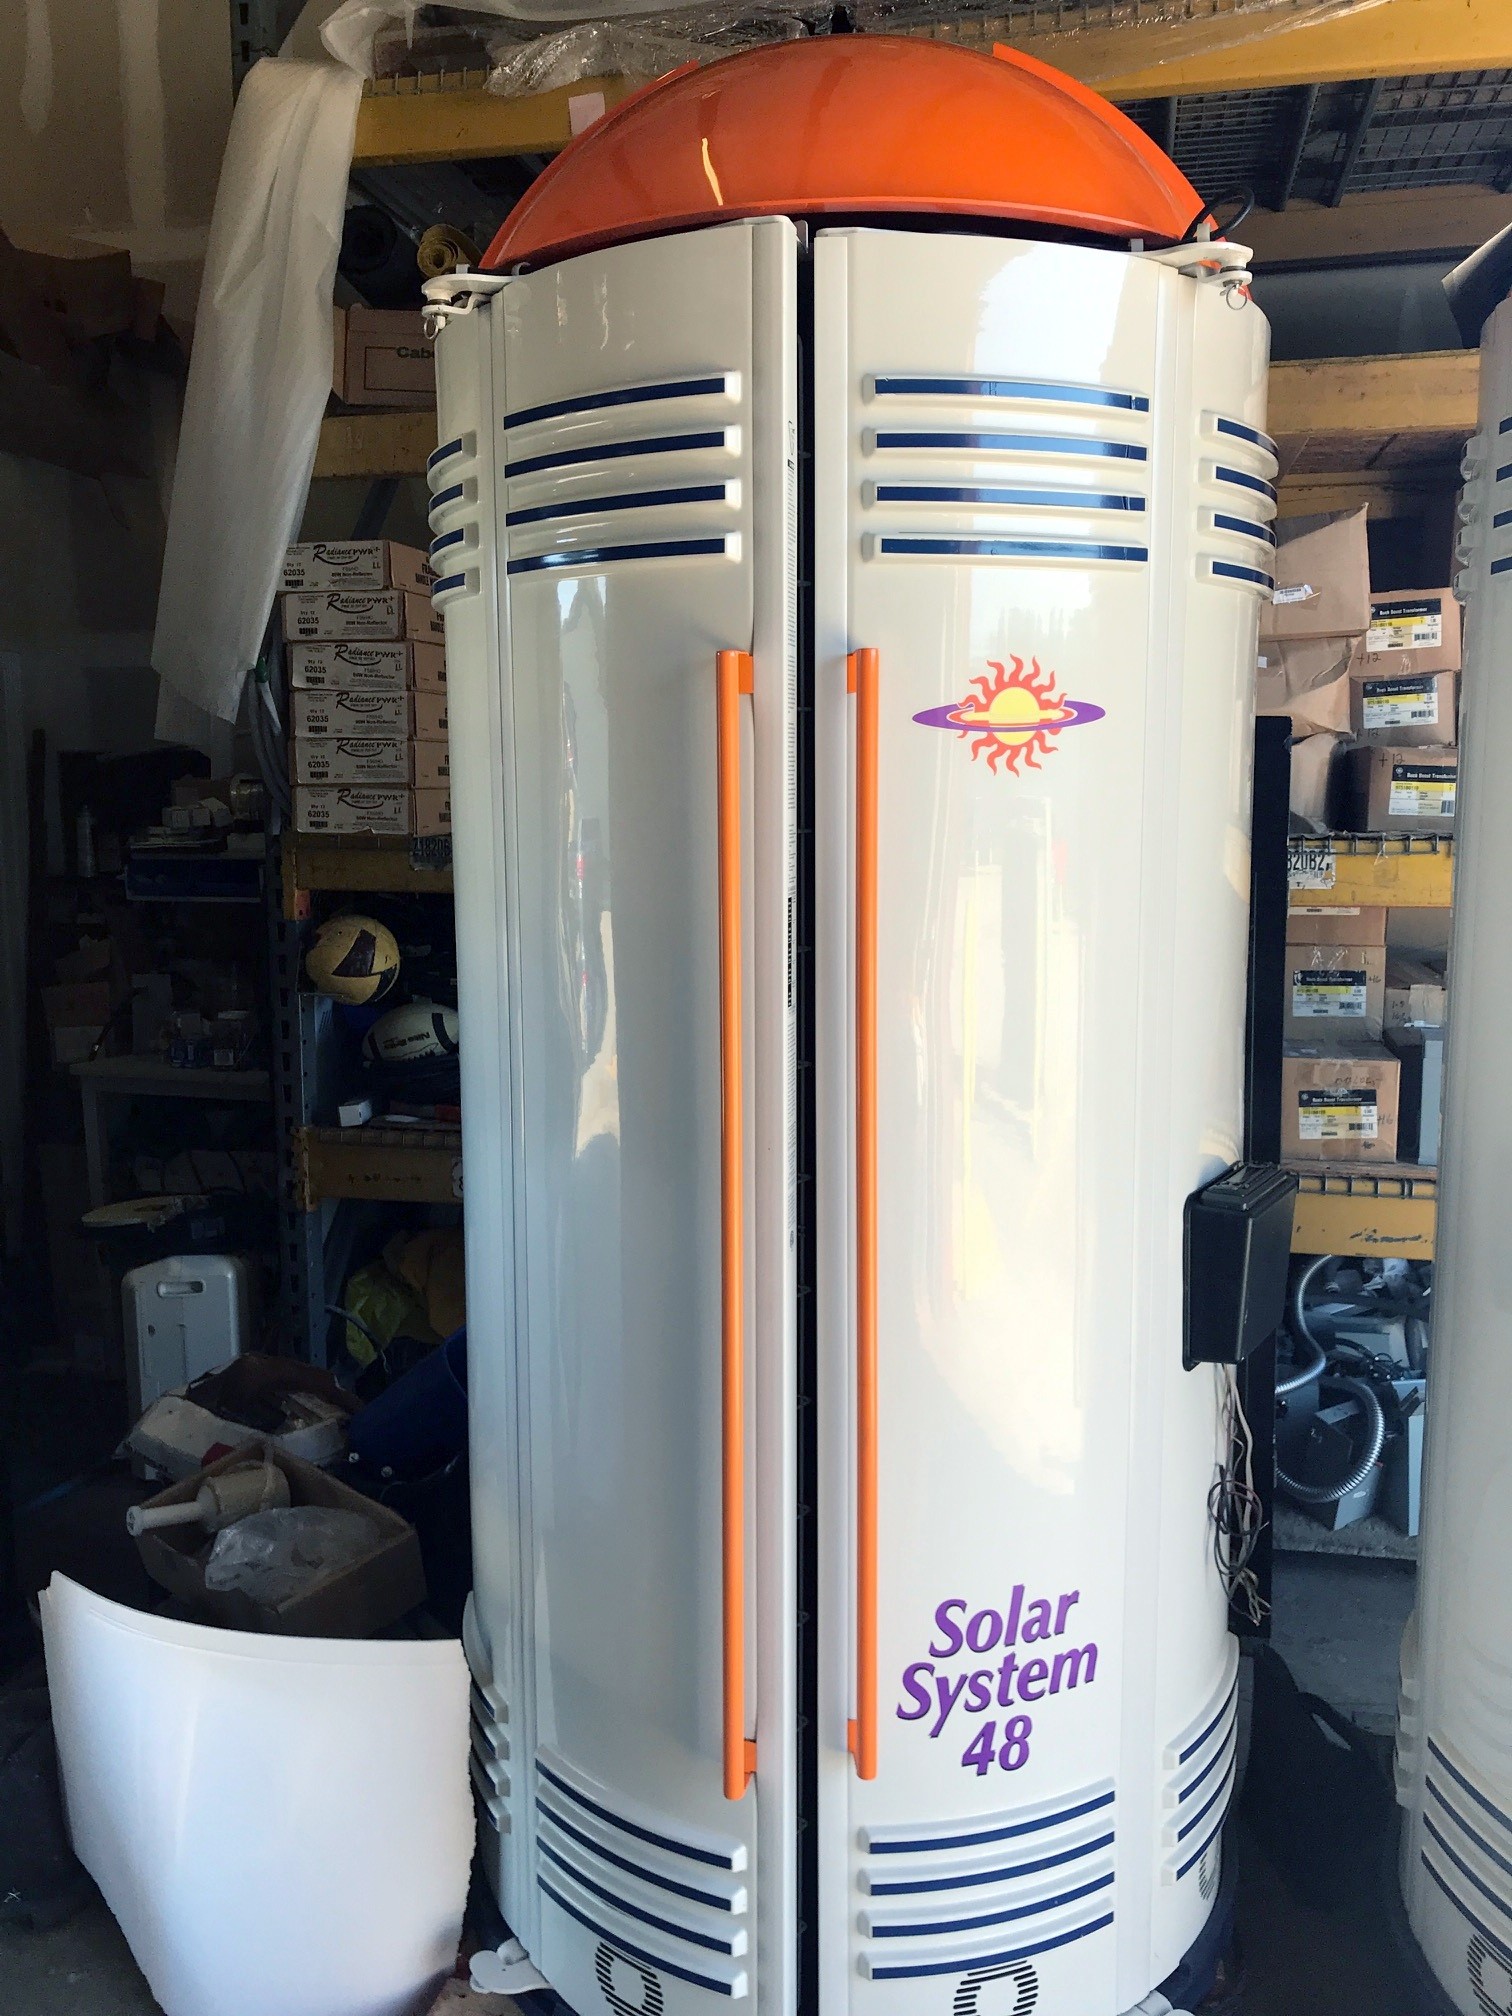 Wolff Tanning > Used - Stand Up Booths > 2003 Sundome XL48 Solar System VIP48 Tanning ...